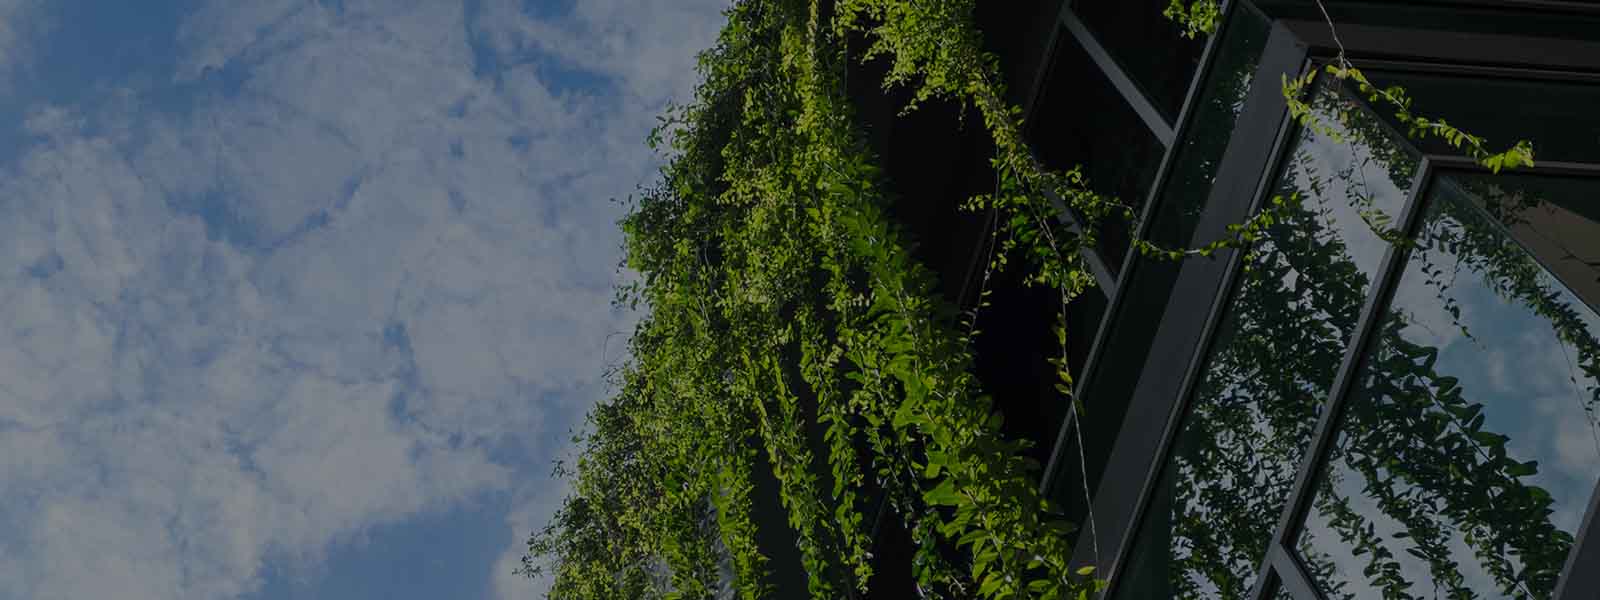 Plants on top of the building